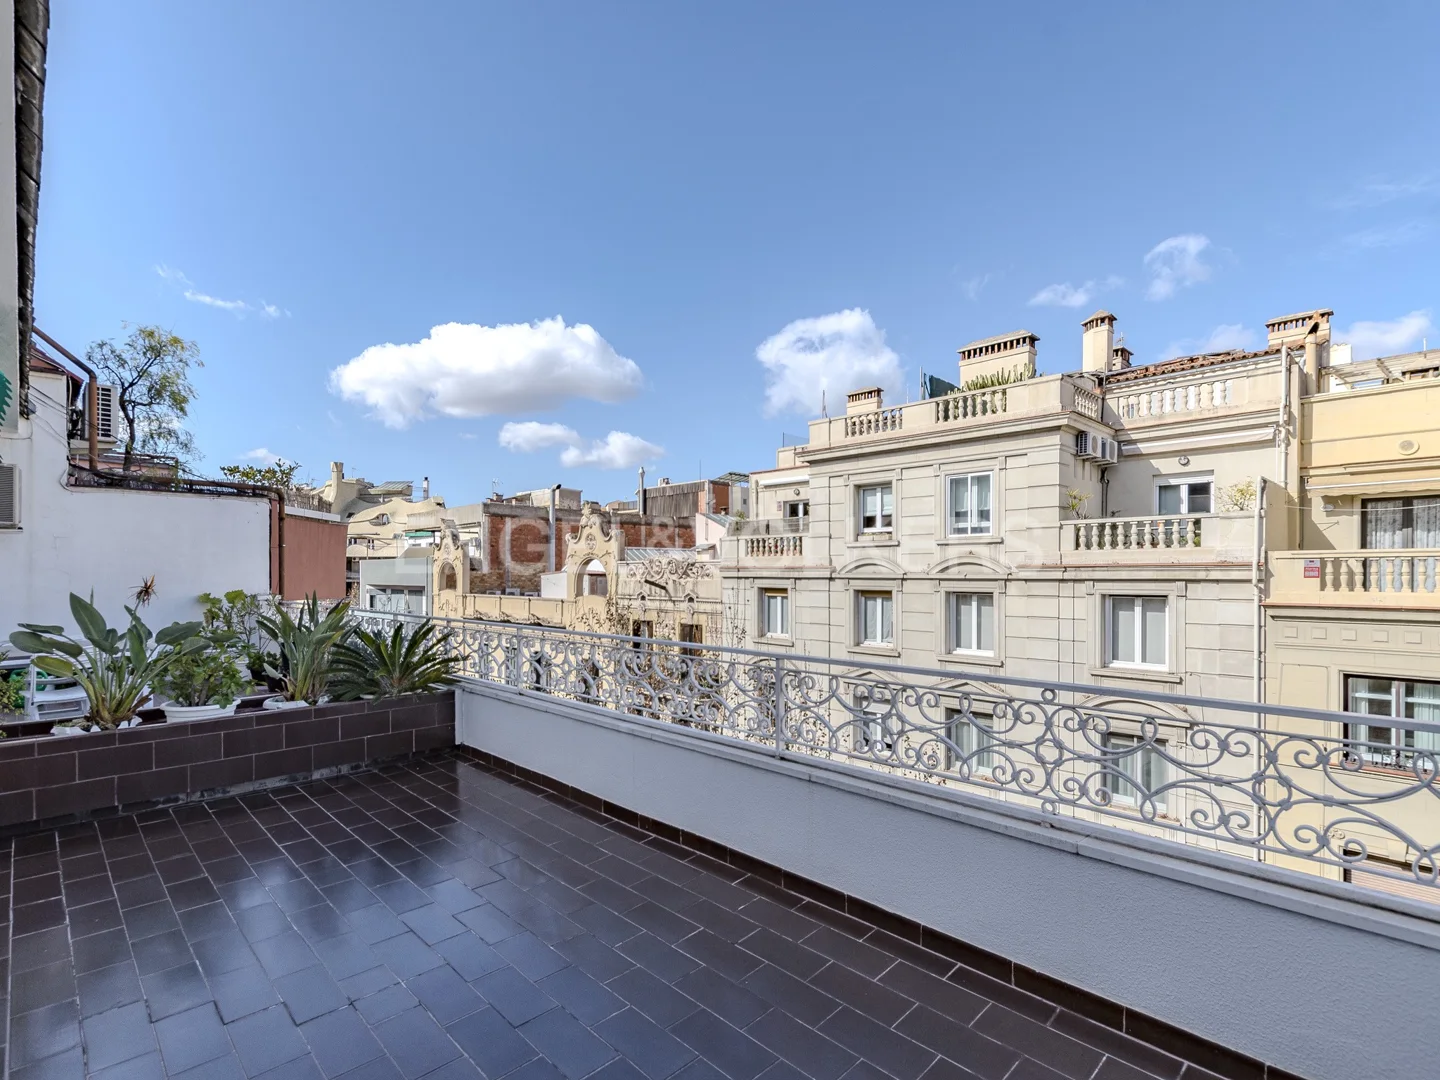 Penthouse with 4 terraces near to Kennedy Square